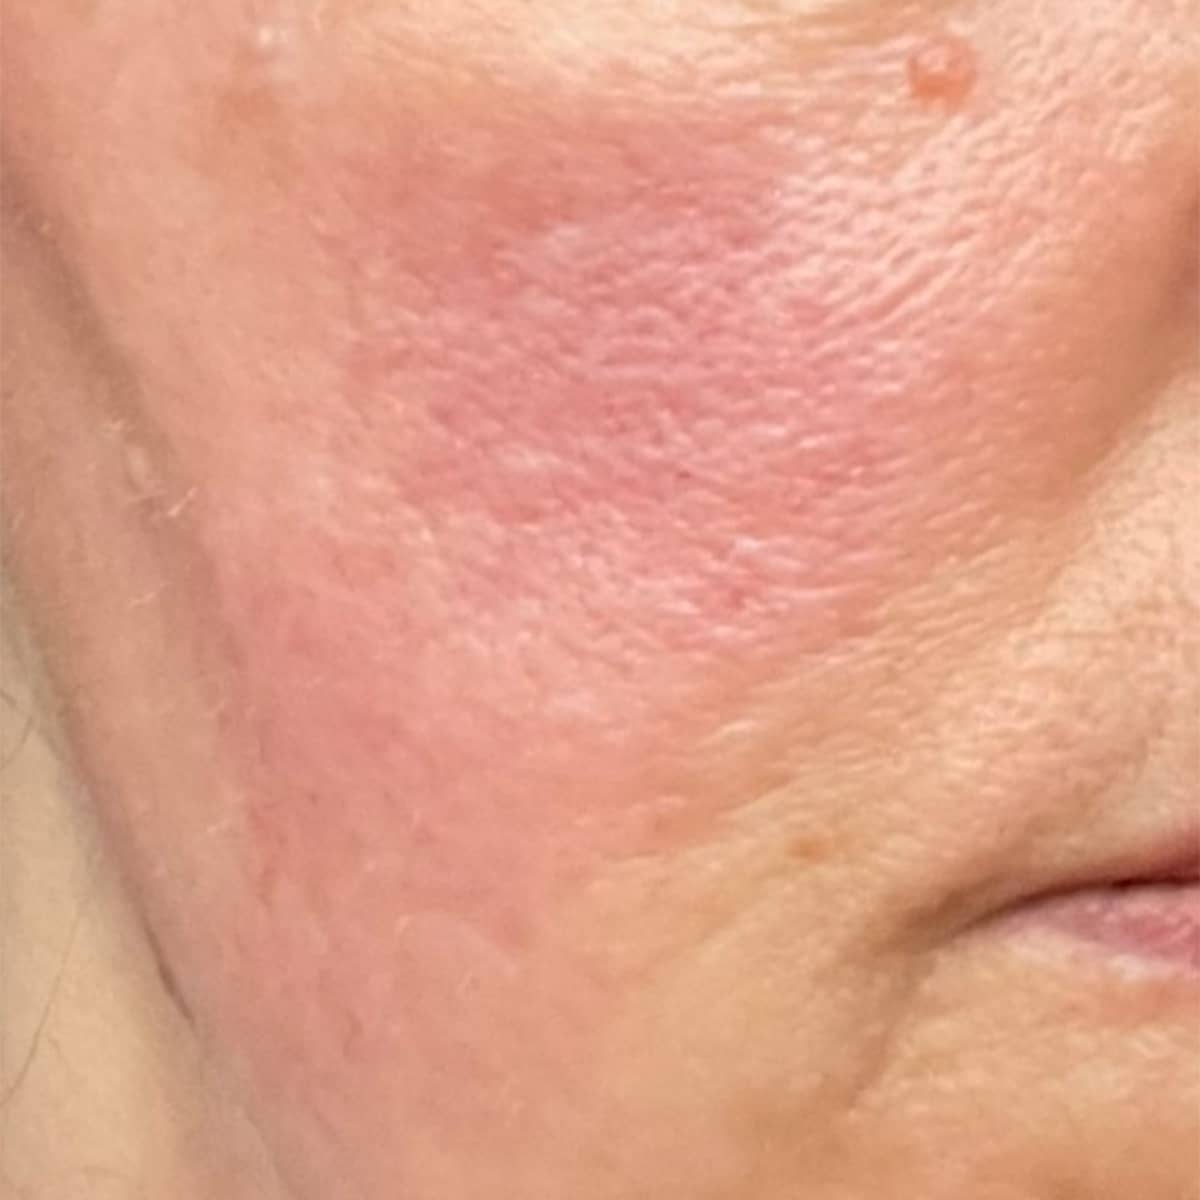 Before image of Redness